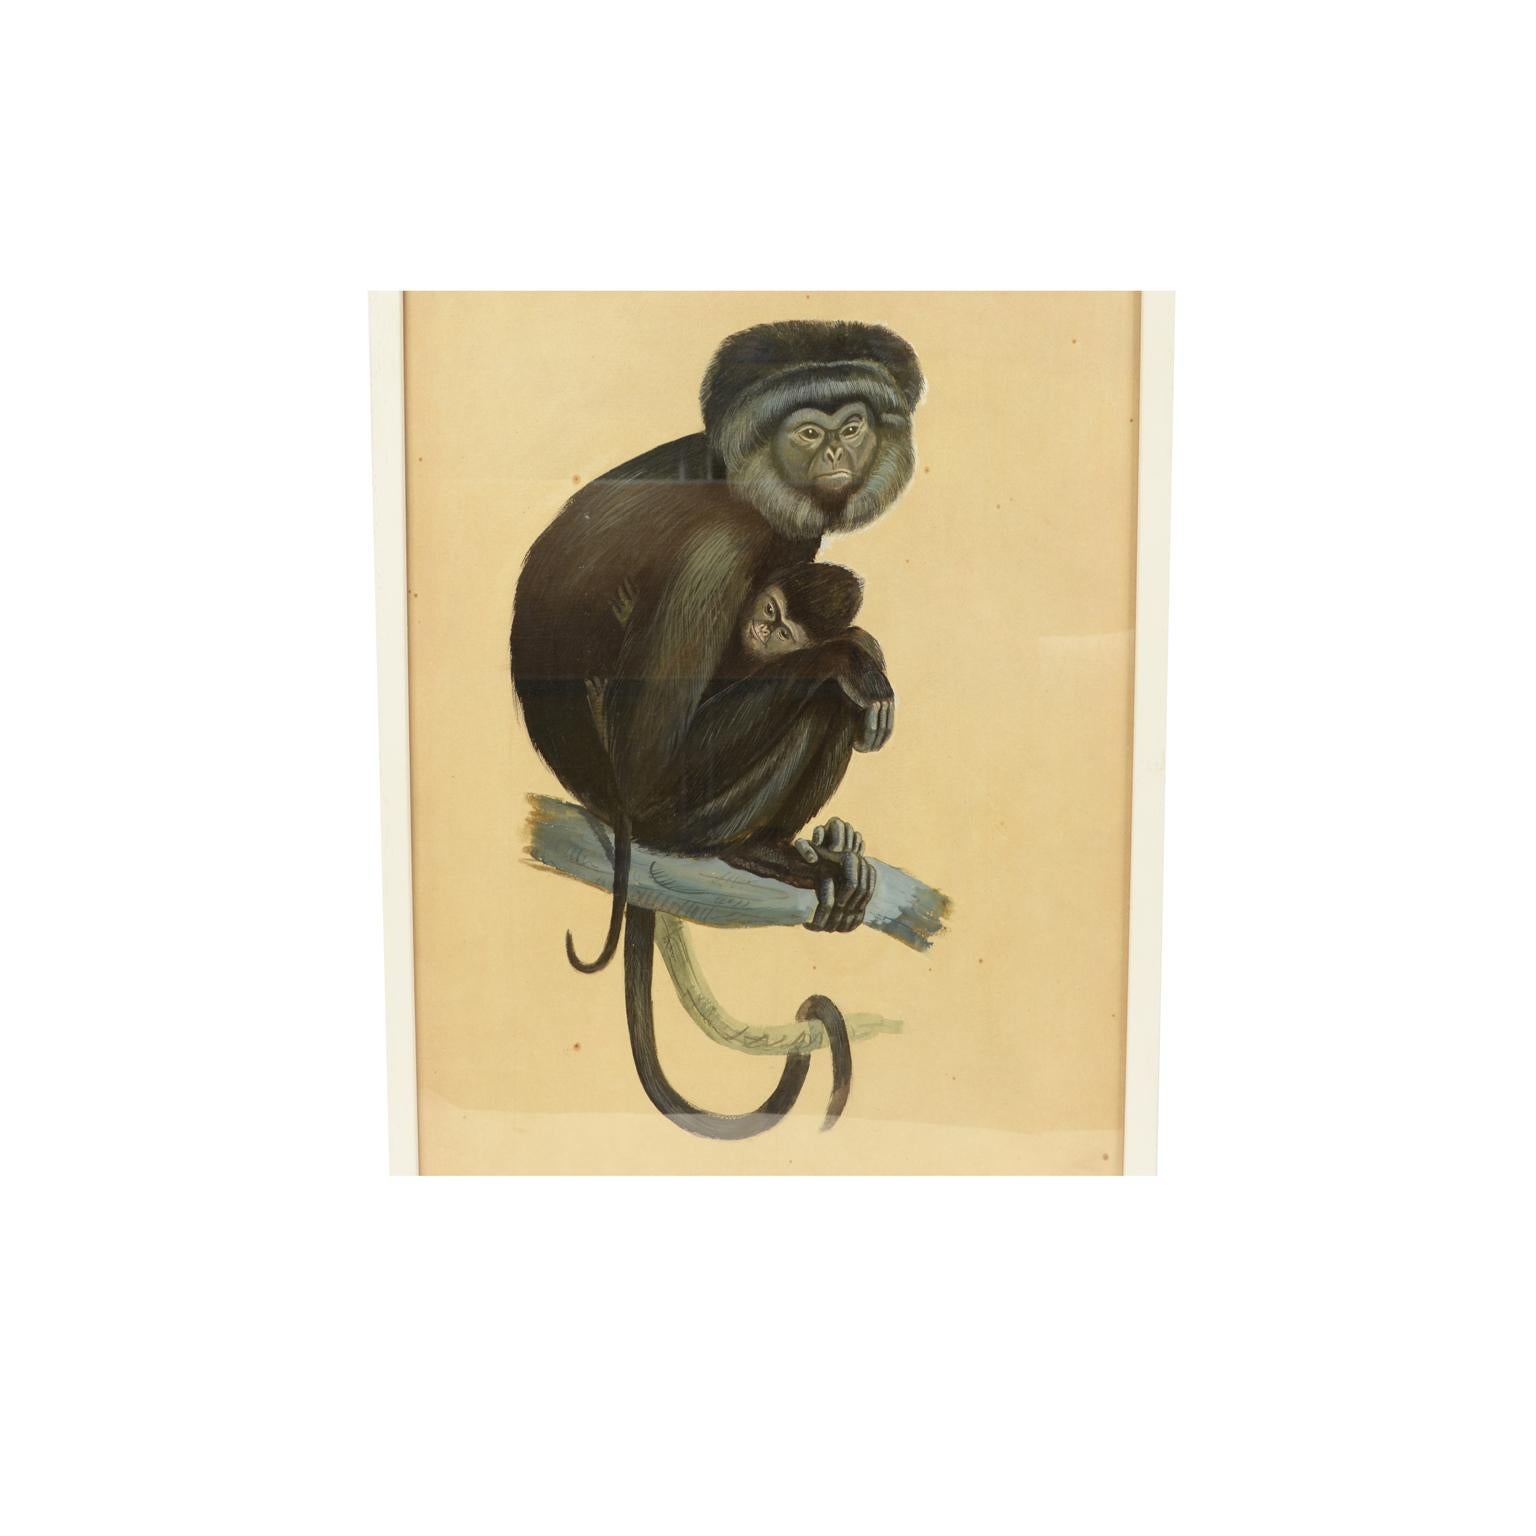 Acrylic colors on paper depicting two gibbons; it is a preparatory sketch commissioned for an animals encyclopedia for children, created and signed by a Korean artist in the 1970s. Very good condition. With frame 49.5 x 67 cm.
Shipping is insured by